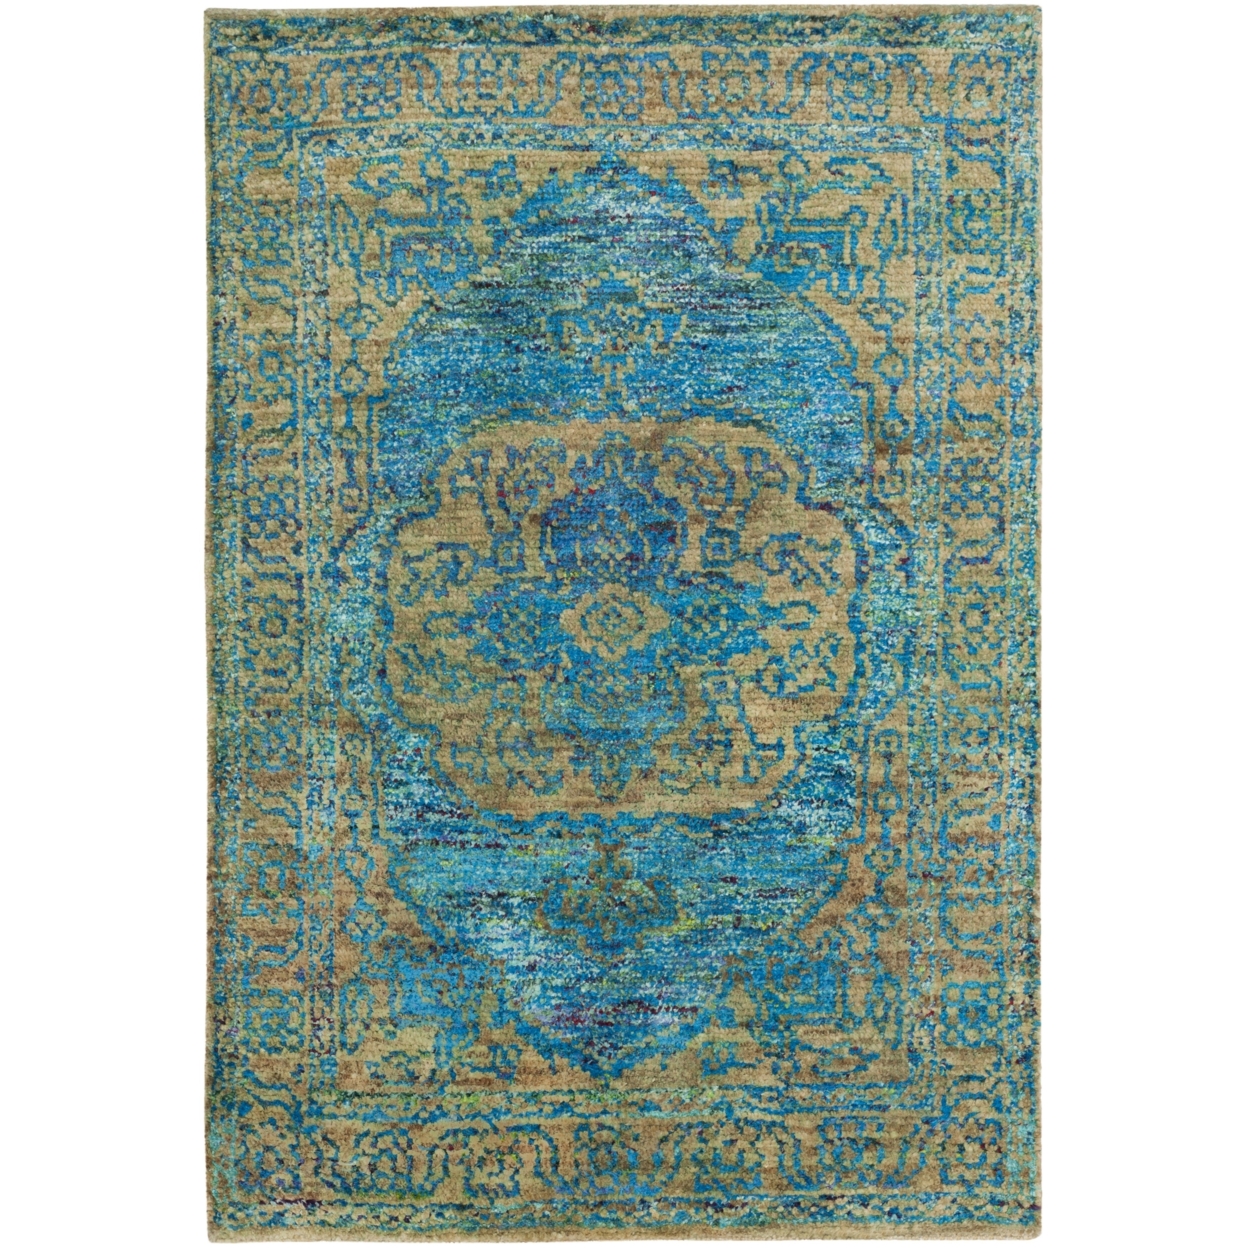 SAFAVIEH Tangier TGR603B Hand-knotted Teal / Beige Rug - 5' X 8'